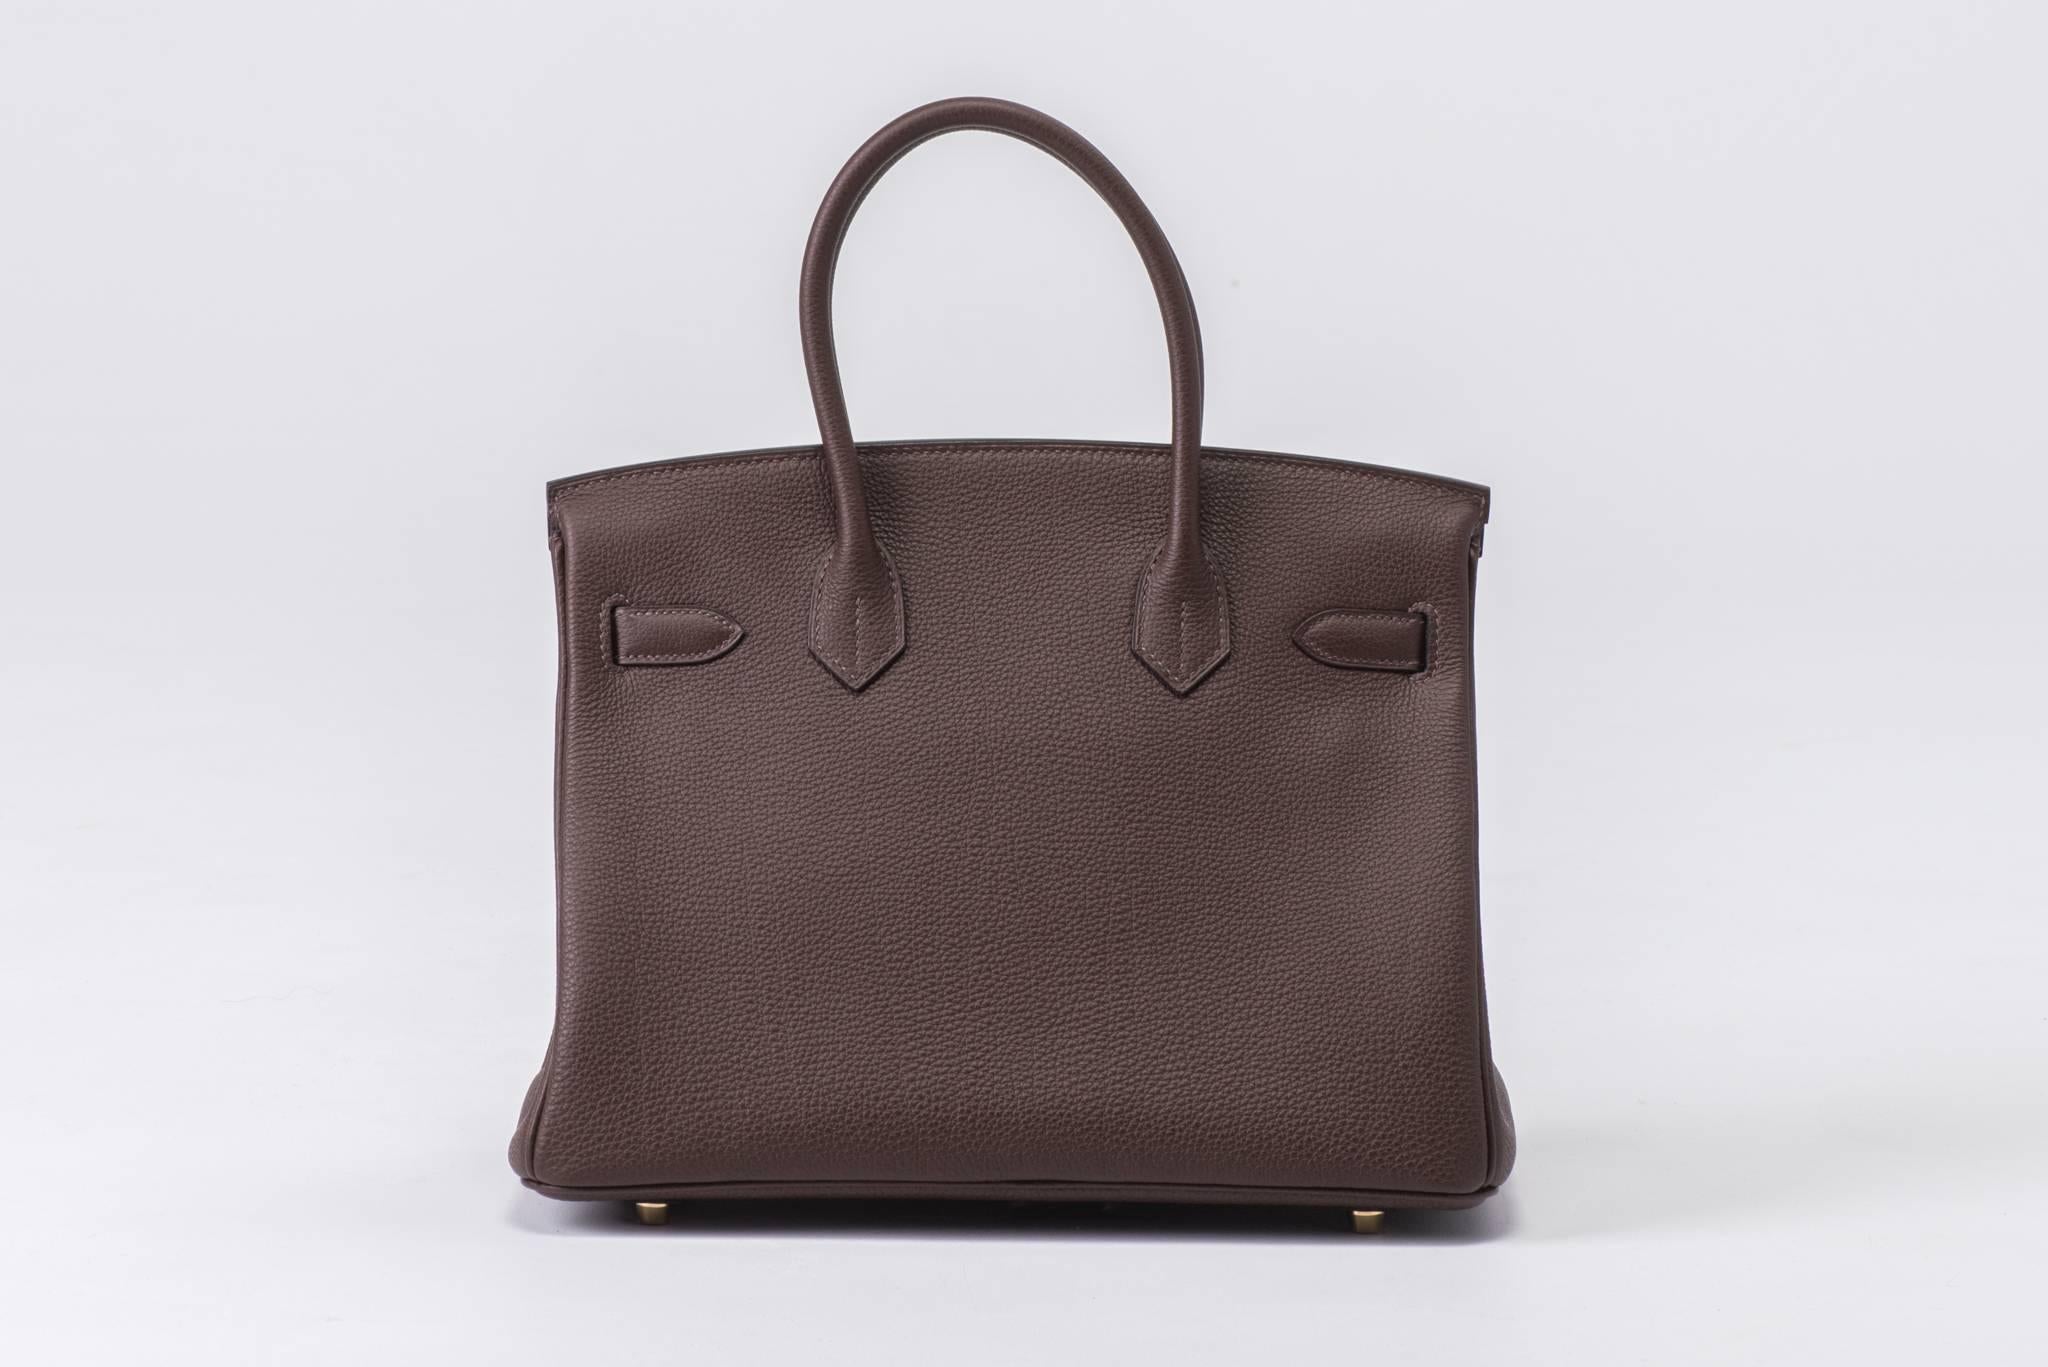 Hermes brand new in box, never carried, Birkin 30 cm cocoa brown togo leather and gold tone hardware. Handle drop 4". Dated T for 2015. Comes with full set: clochette, tirette, lock, keys, rain jacket, dust cover, box and ribbon.
